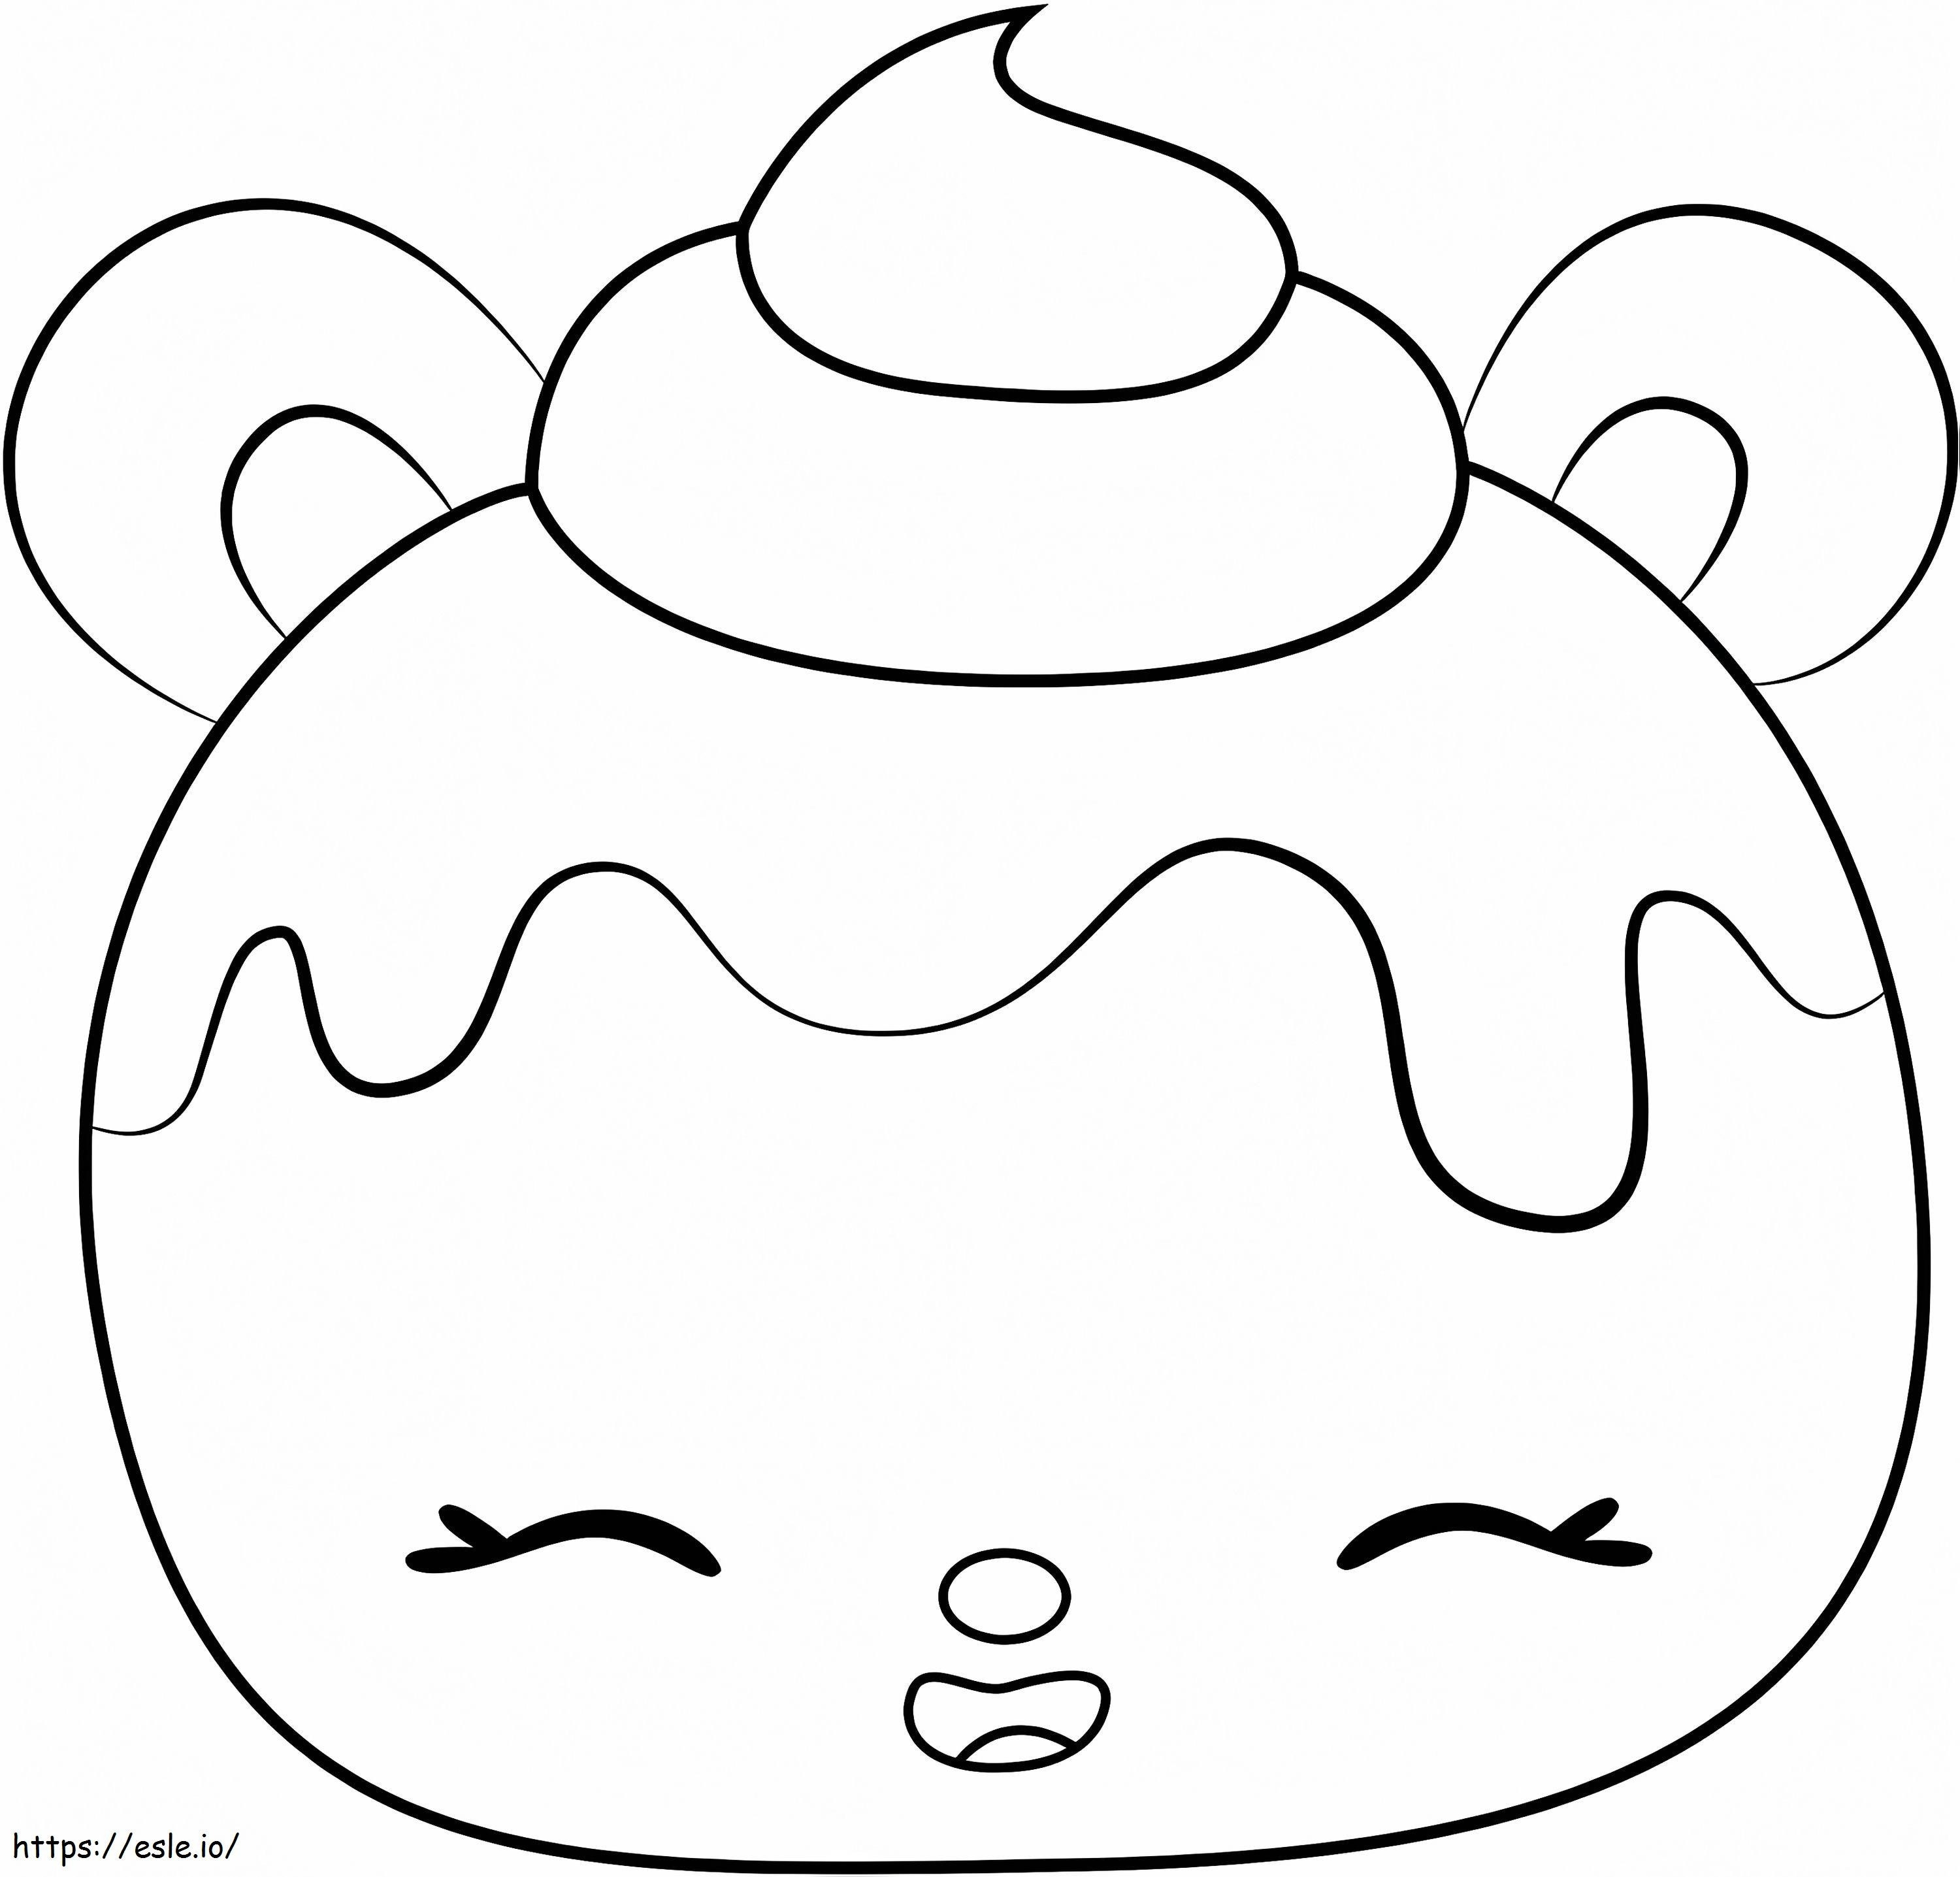 Fun Velvety Red In Num Noms coloring page